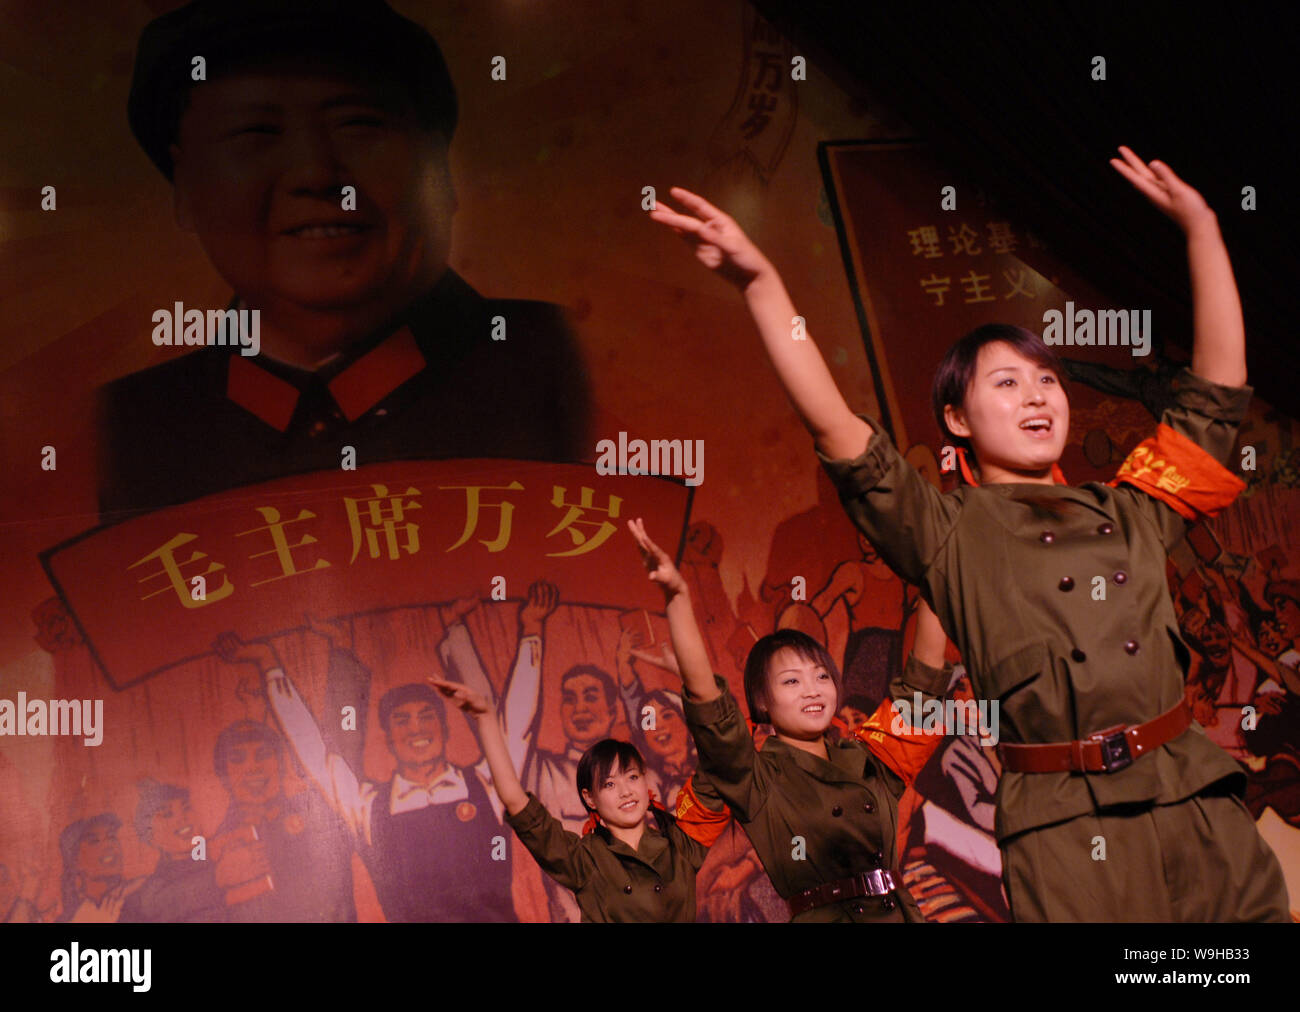 Chinese waiters dressed like red guards during the Cultural Revolution period perform revolutionary songs and dances at a Cultural Revolution themed r Stock Photo